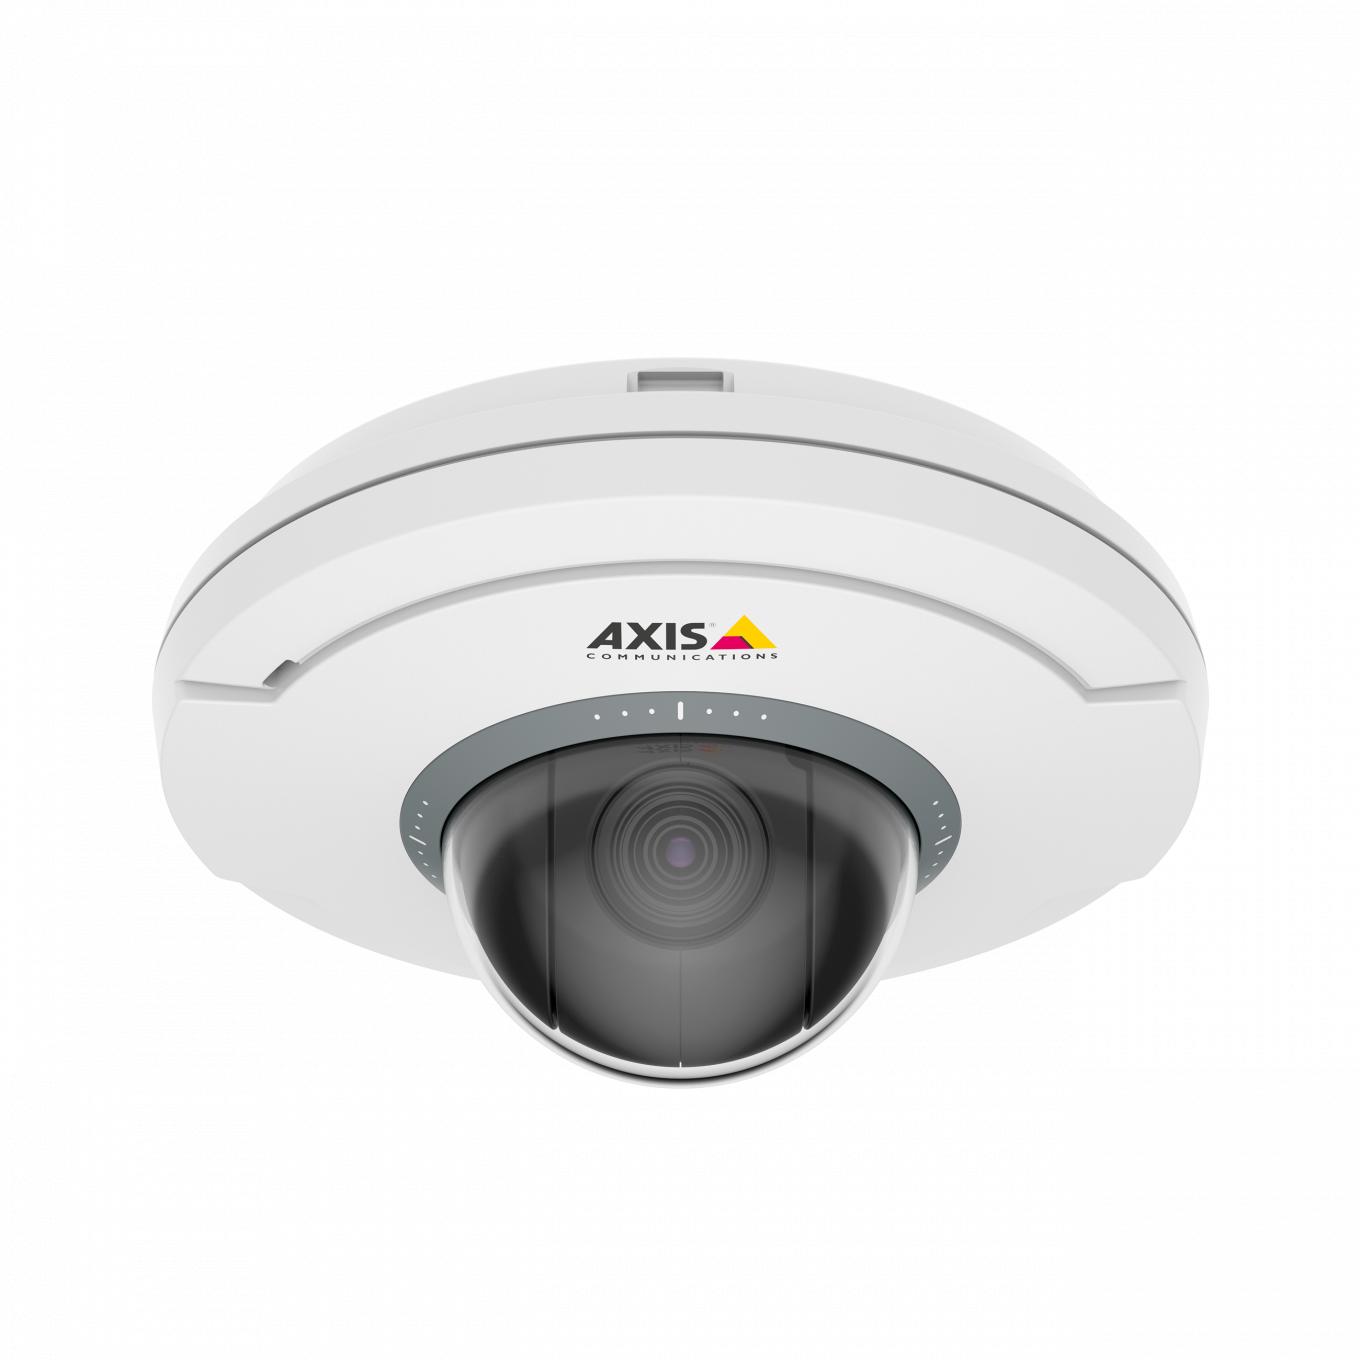 AXIS M5075-G PTZ Camera | Axis Communications